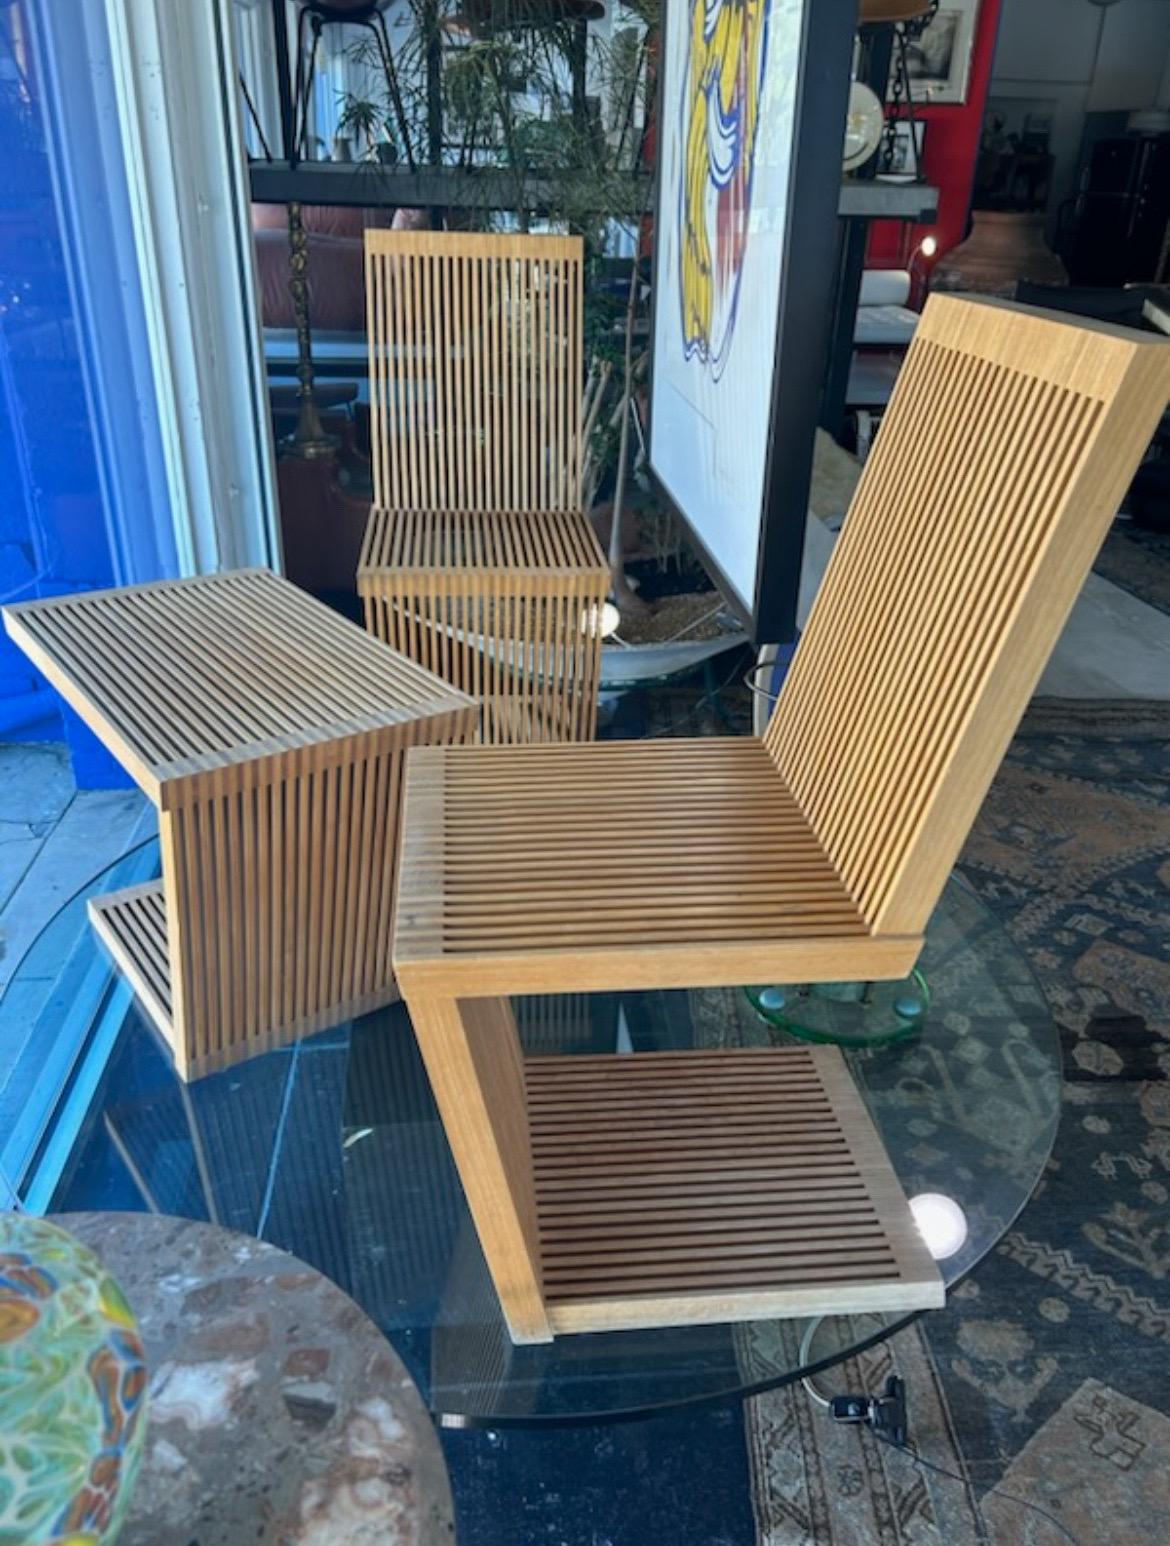 Pair of Chairs and Table by Alwy Visschedyk, 1970's, ash; and signed.

Provenance: 
Property from a Beverly Hills, CA Estate

Dimensions: 
Chairs: 37 x 16 x 23 in. (94 x 40.6 x 58.4 cm.), Seat height: 18 in. (45.7 cm.), Table: 19 x 24 1/2 x 15 in.